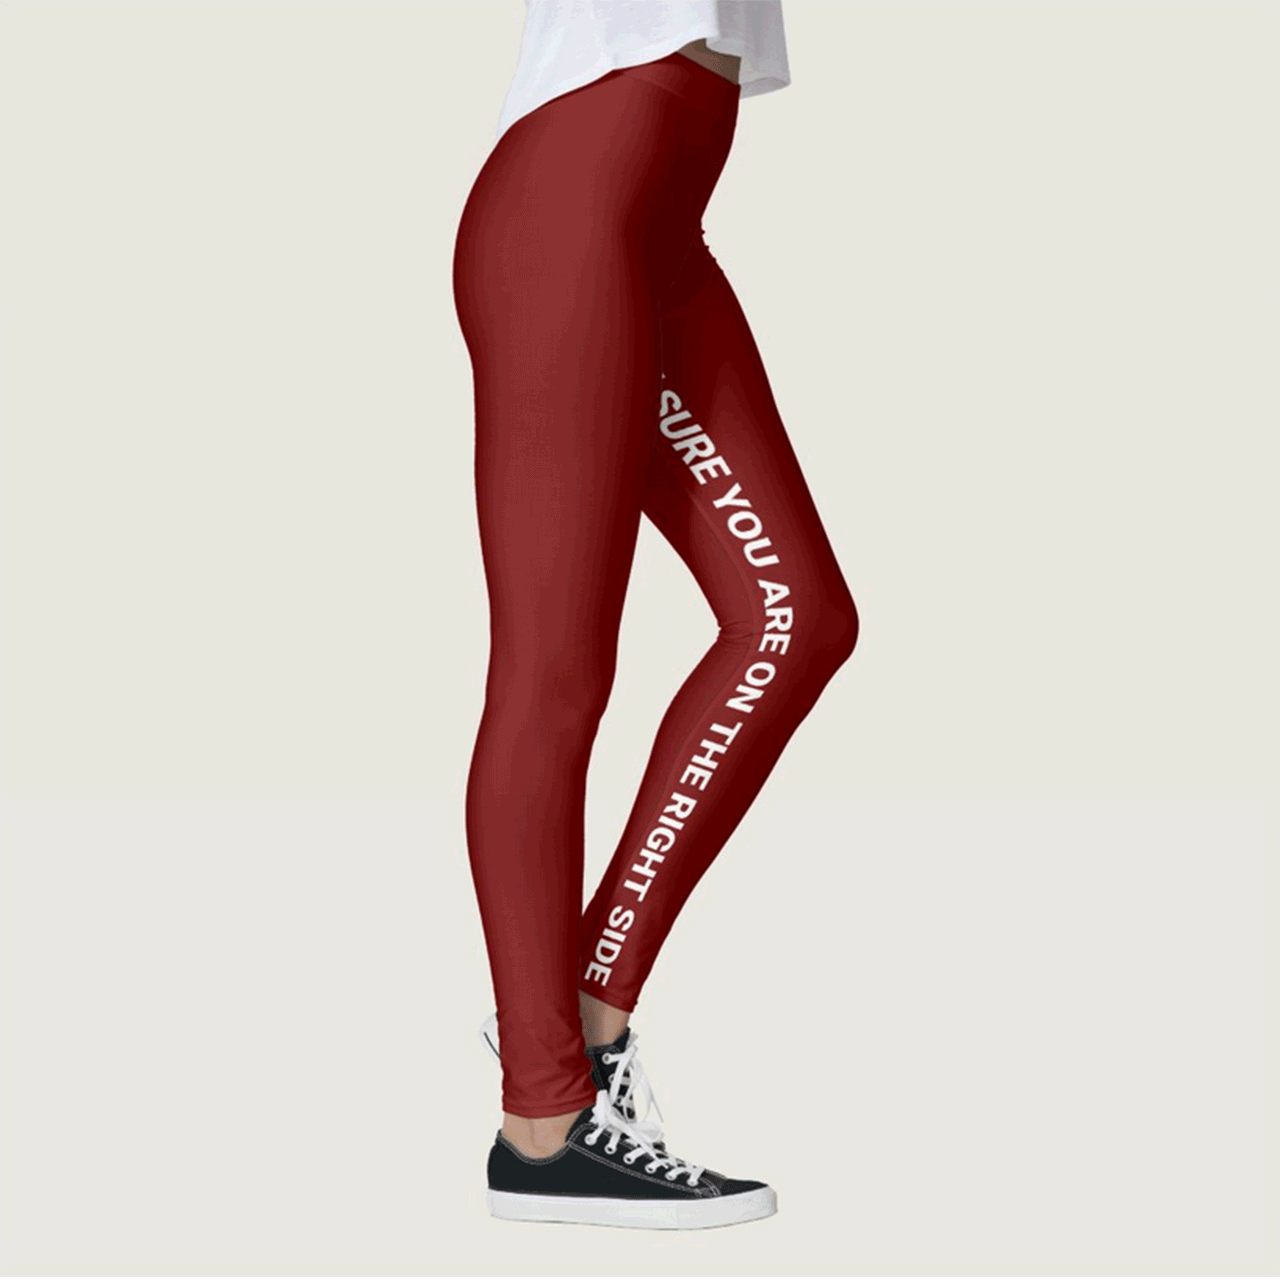 'BE SURE YOU ARE ON THE RIGHT SIDE' legging by Lénie Blue